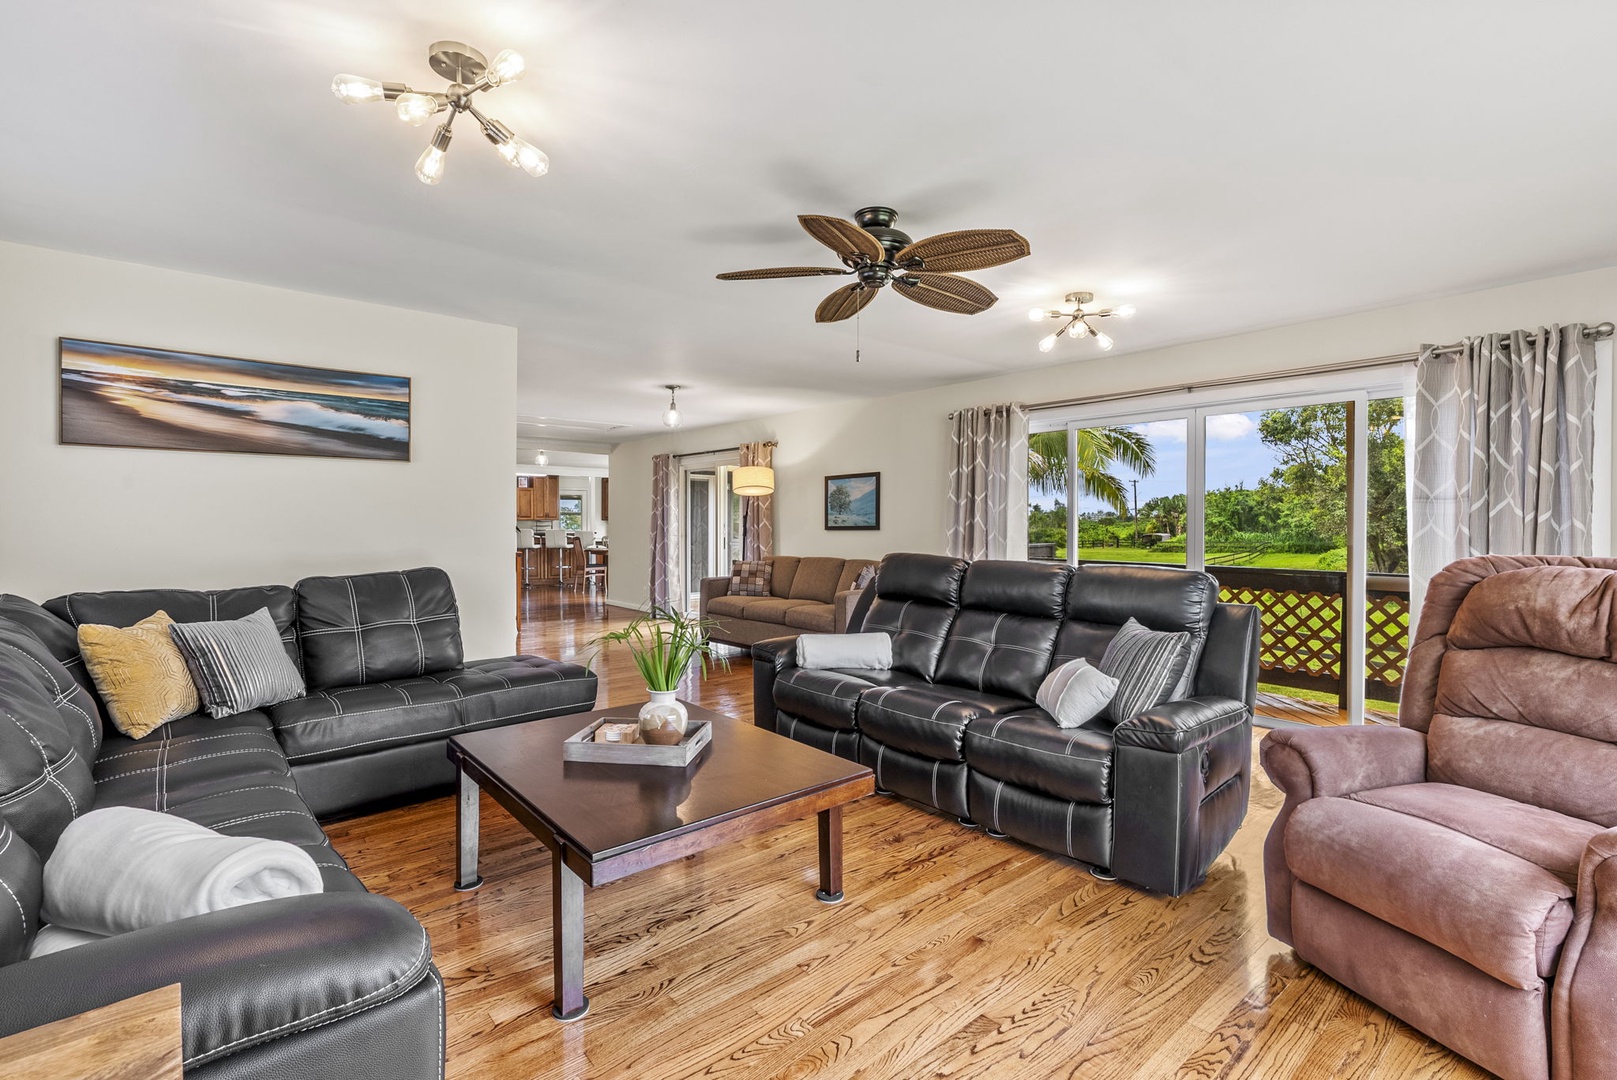 Hauula Vacation Rentals, Mau Loa Hale - Natural light from windows and sliders